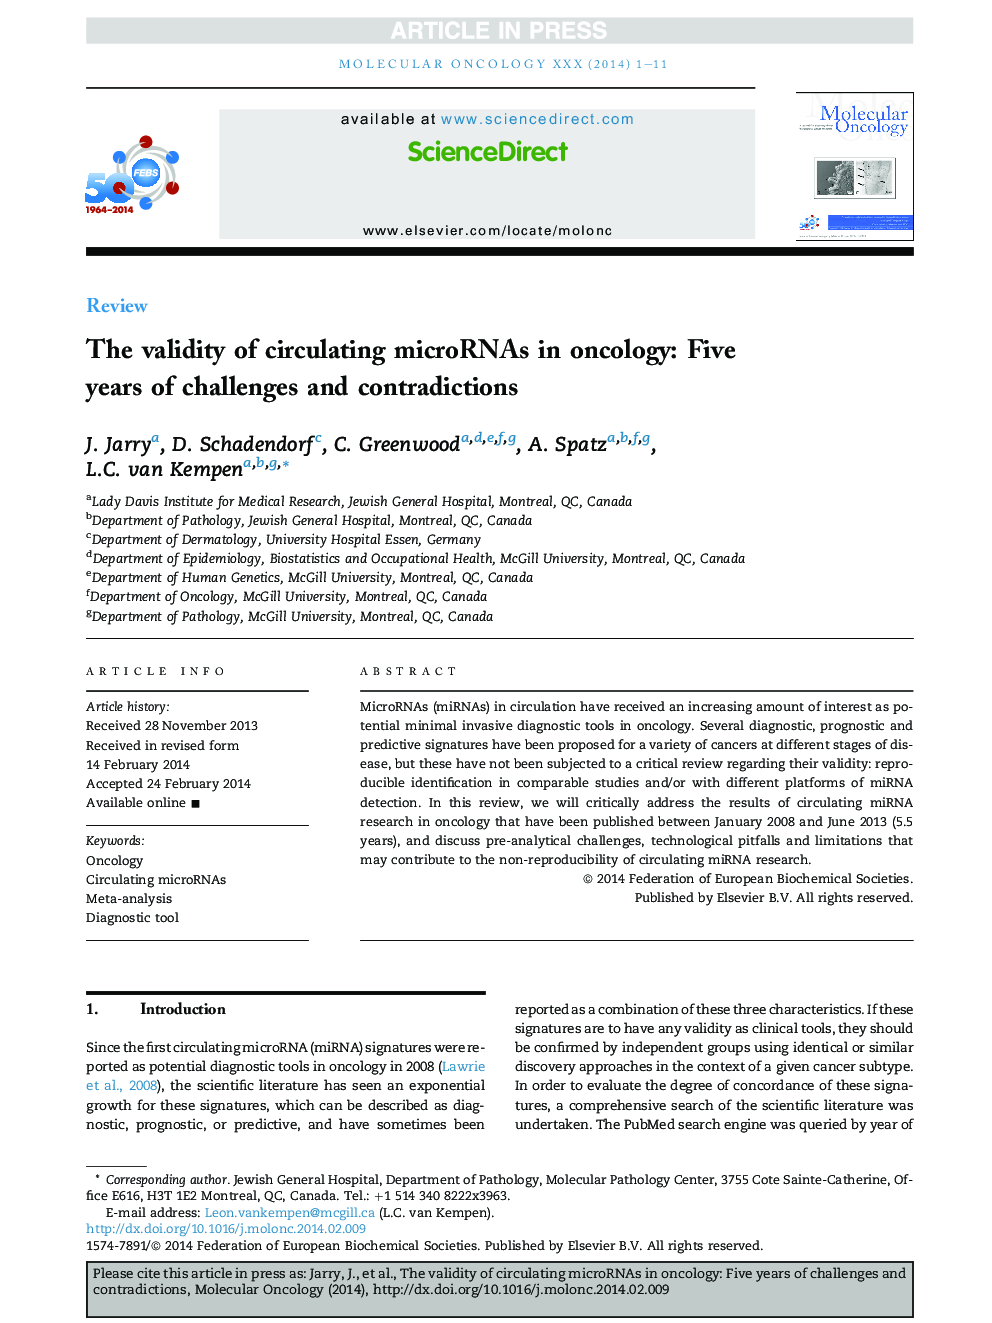 The validity of circulating microRNAs in oncology: Five years of challenges and contradictions